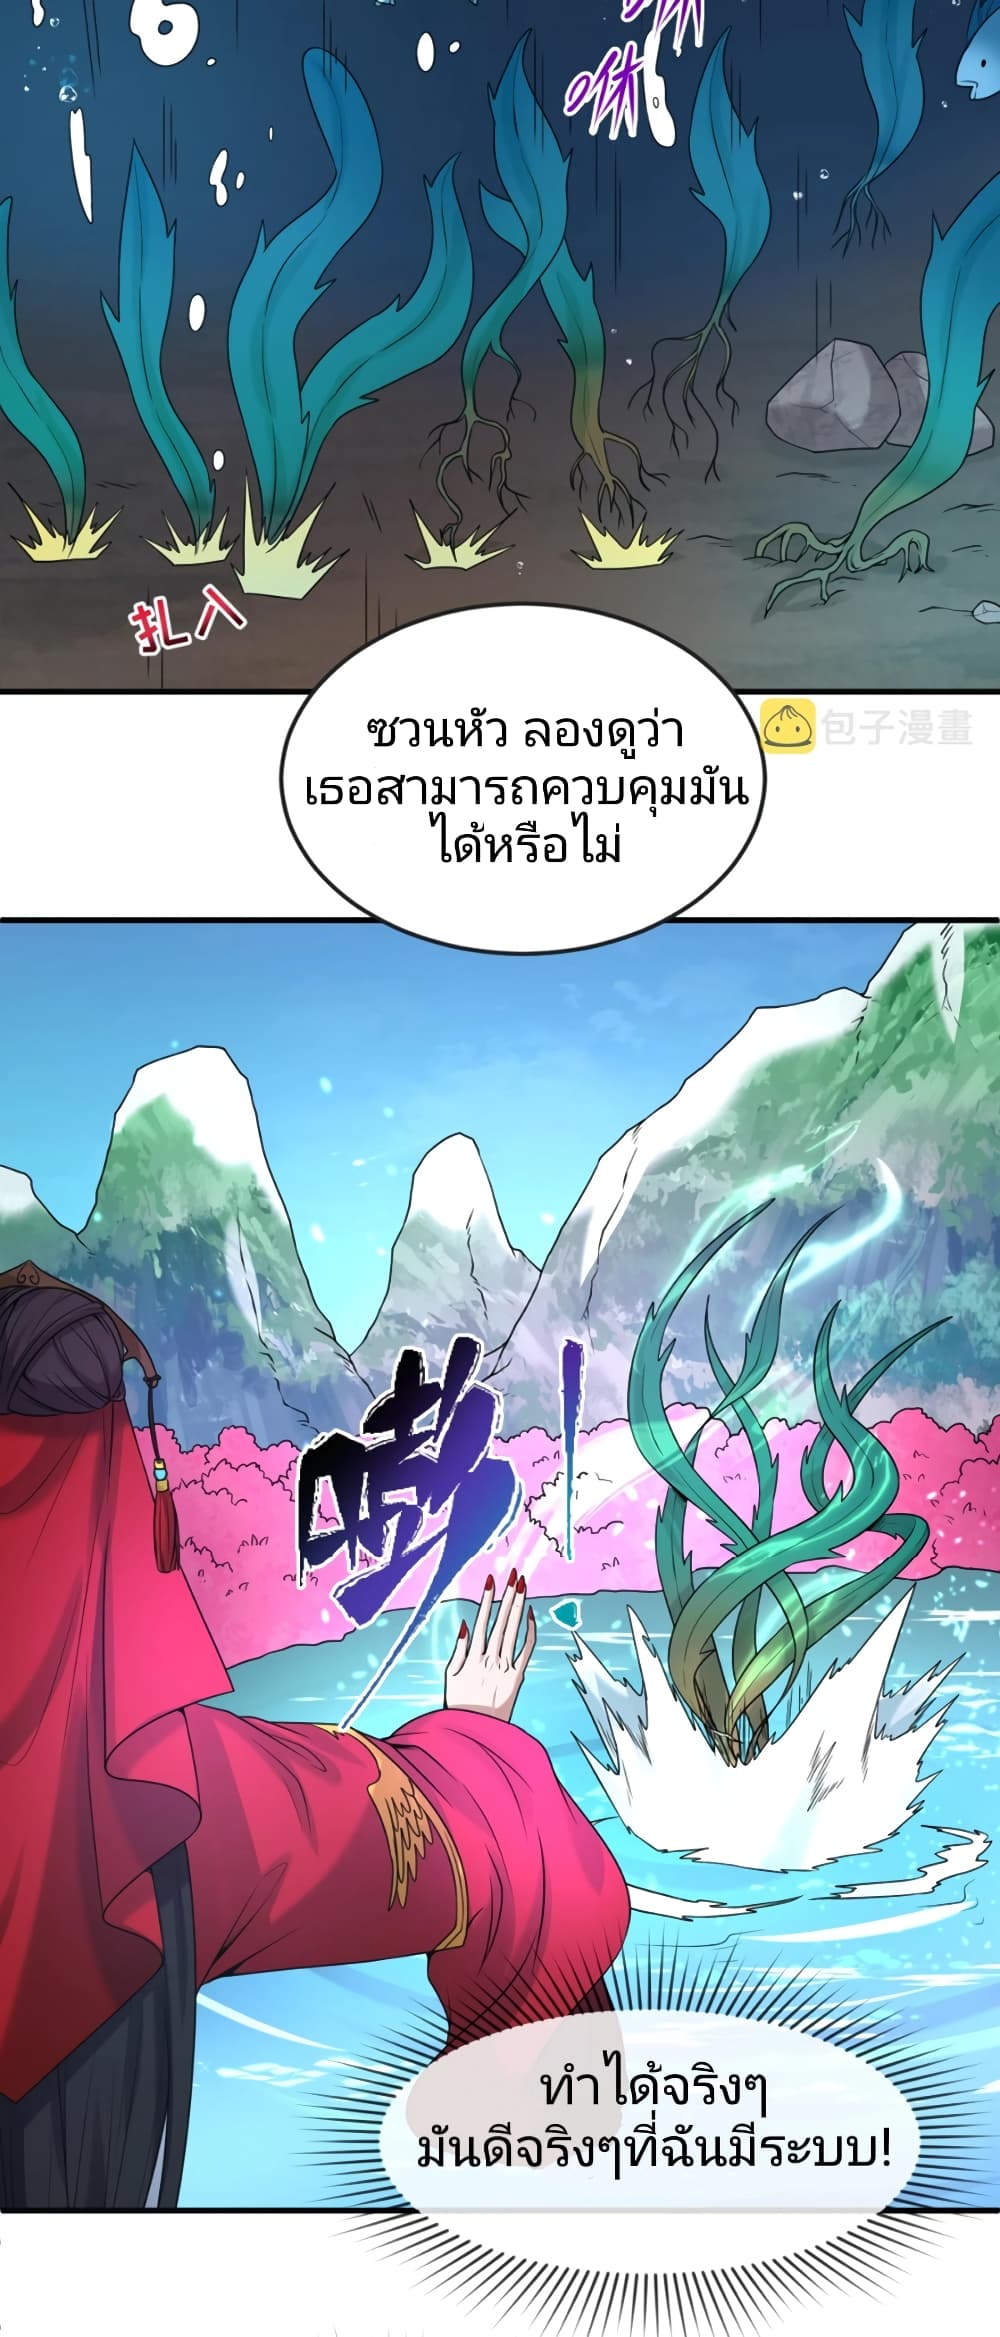 The Age of Ghost Spirits à¸à¸­à¸à¸à¸µà¹ 23 (37)